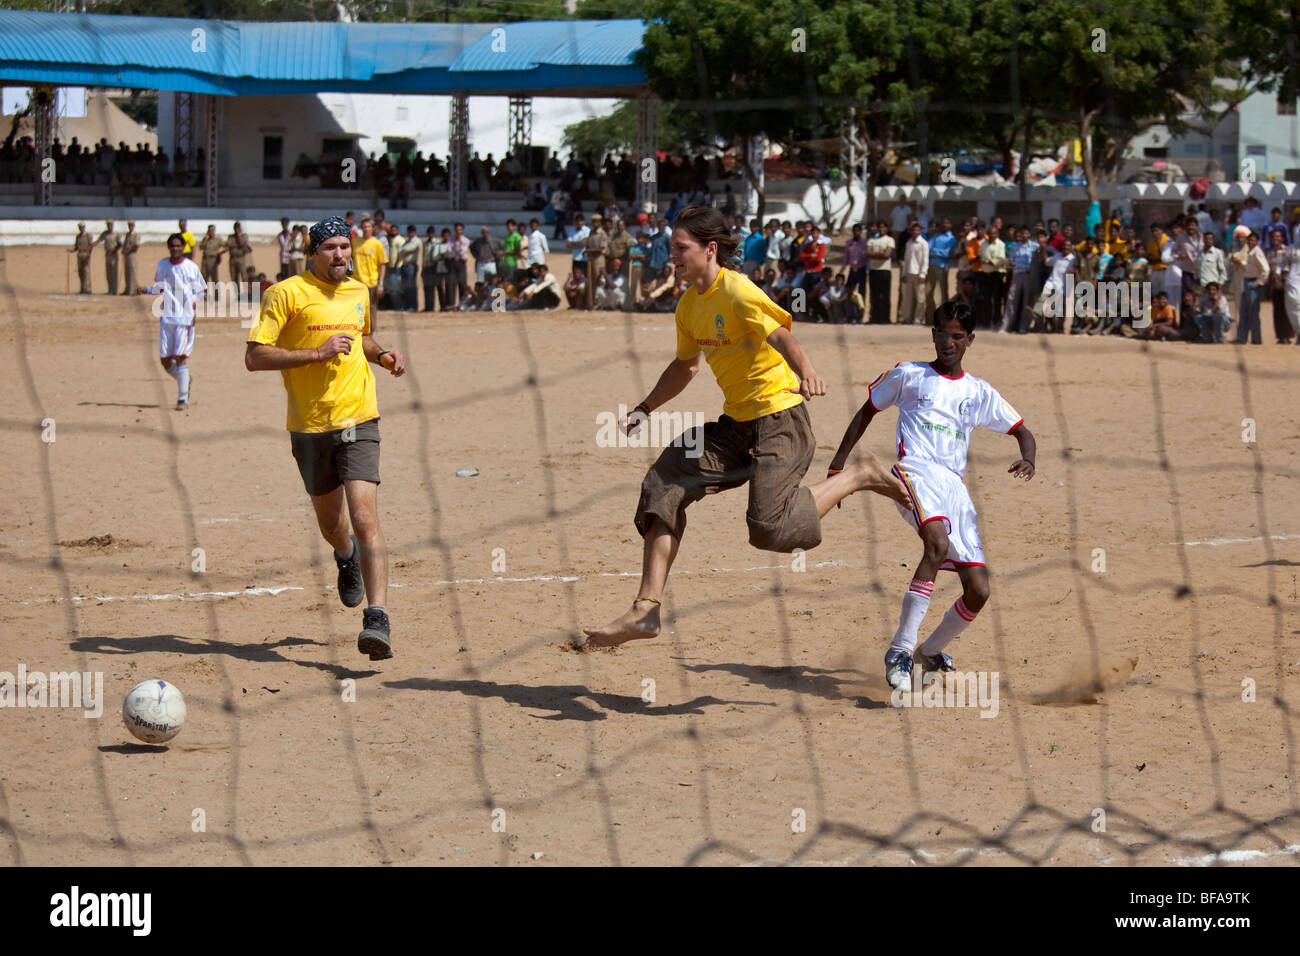 Foreigner vs the Locals Chak de Rajasthan Football Match at the Camel Fair in Pushkar India (3 to 2, visitors) Stock Photo